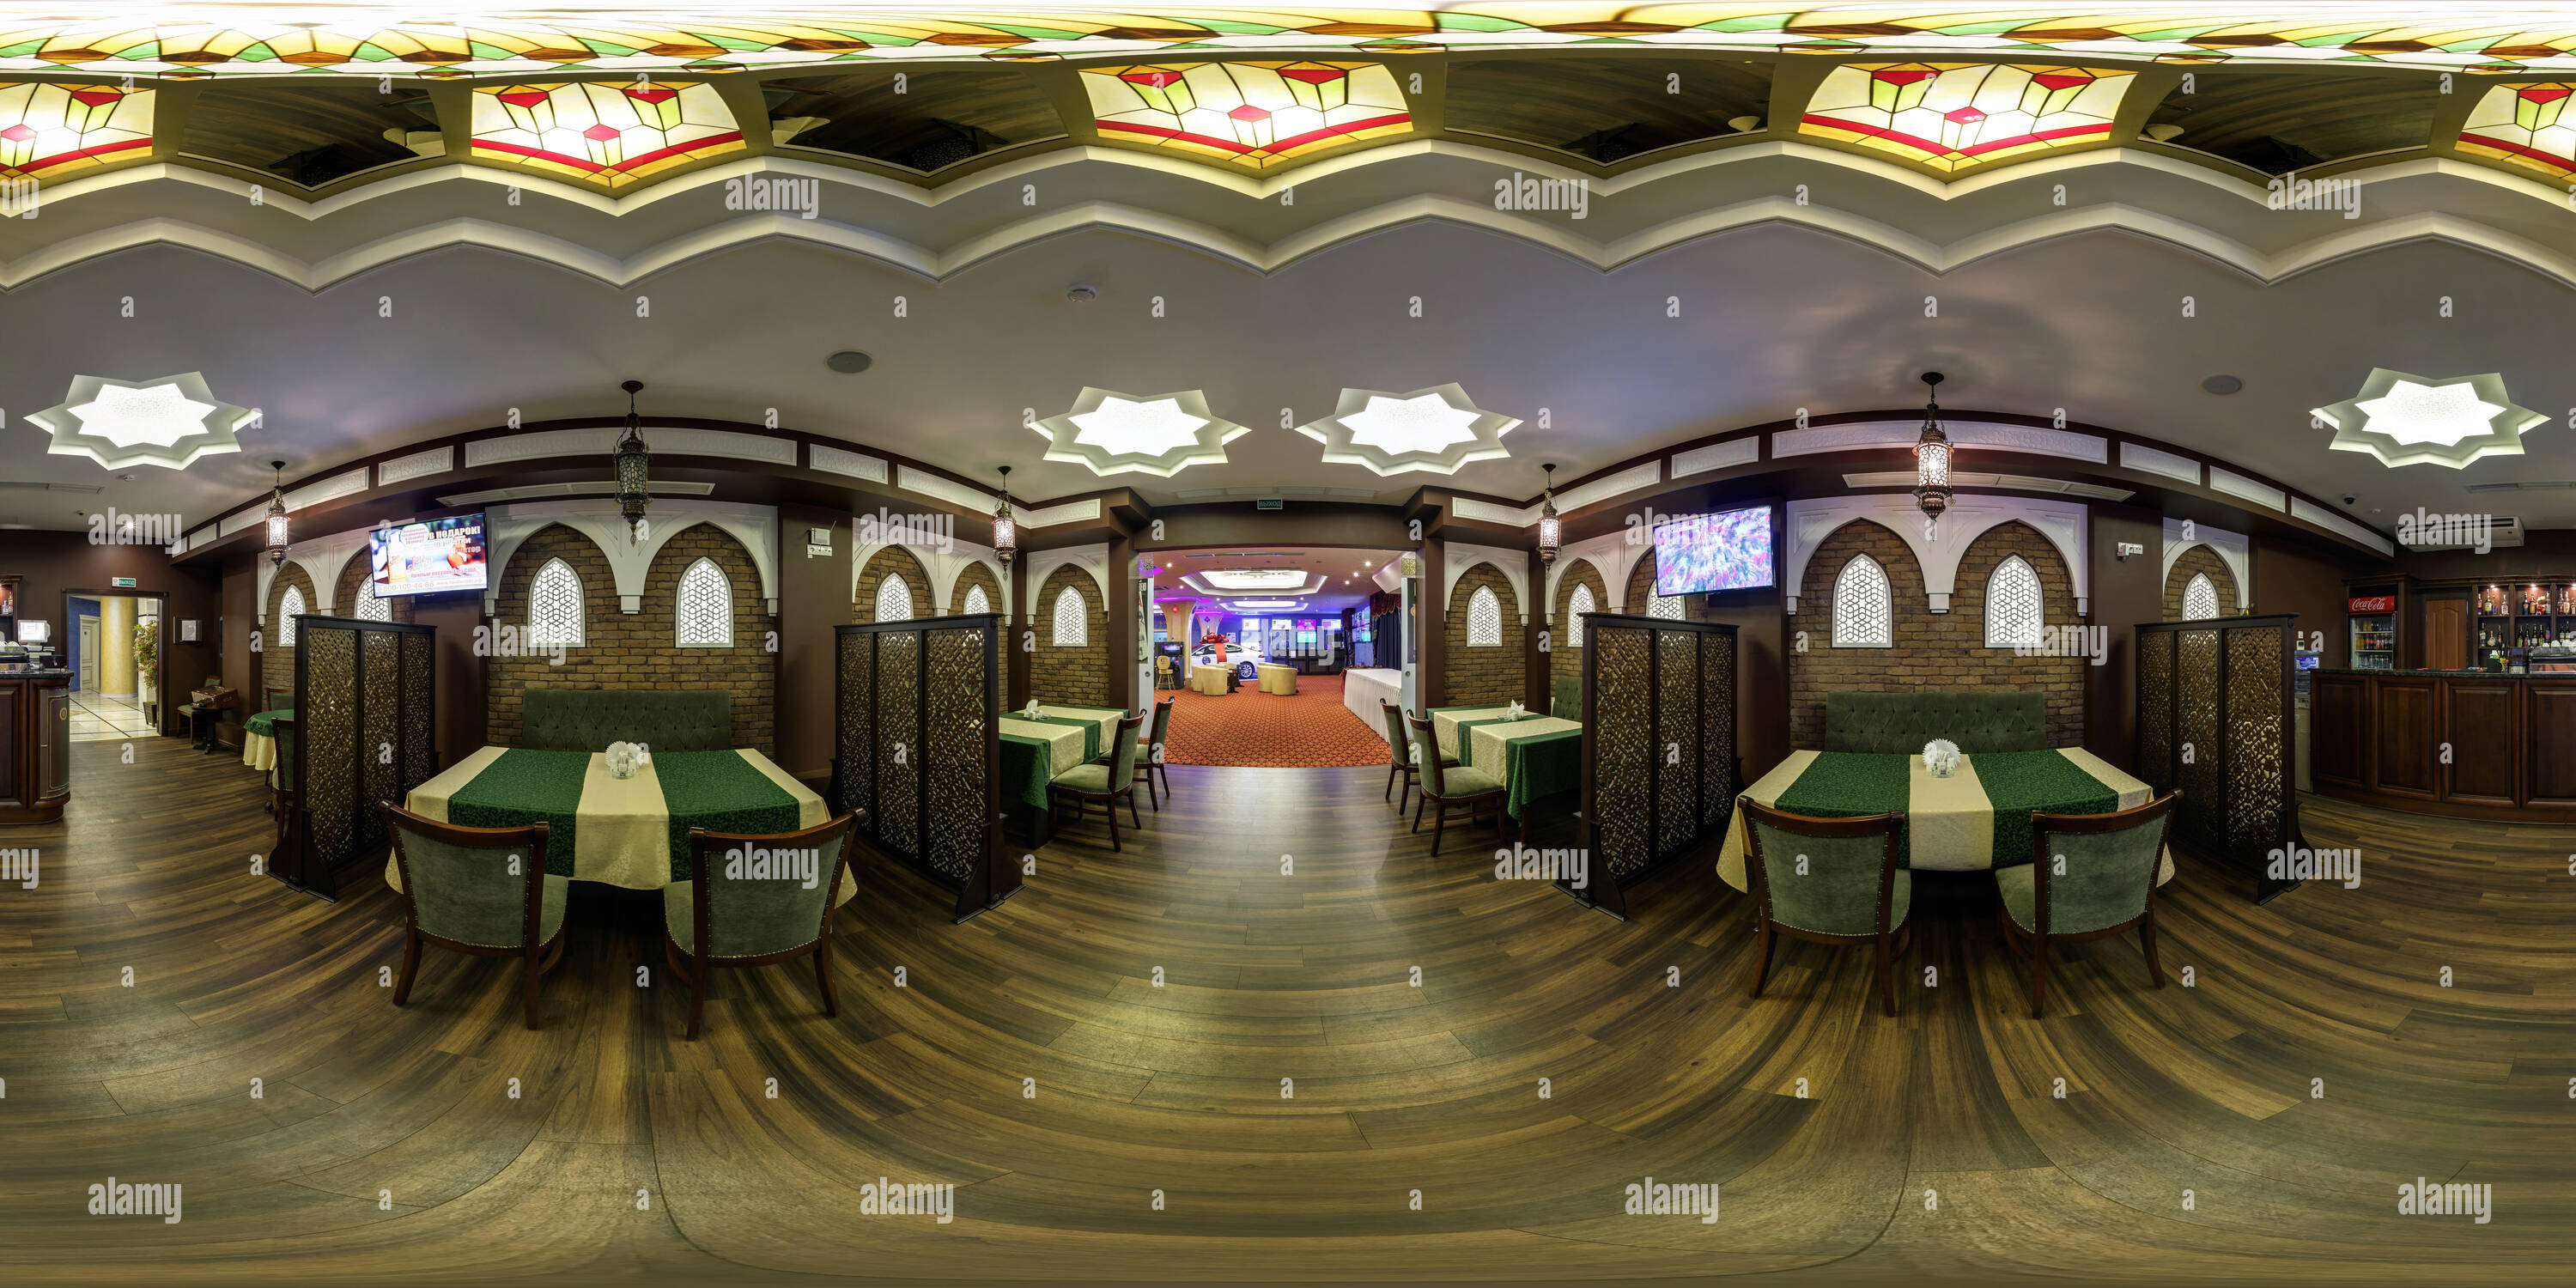 360 degree panoramic view of MINSK, BELARUS - JULY 25, 2014: 360 panorama in interior of elite stylish cafe in modern casino. Full 360 by 180 degree angle view seamless panorama i